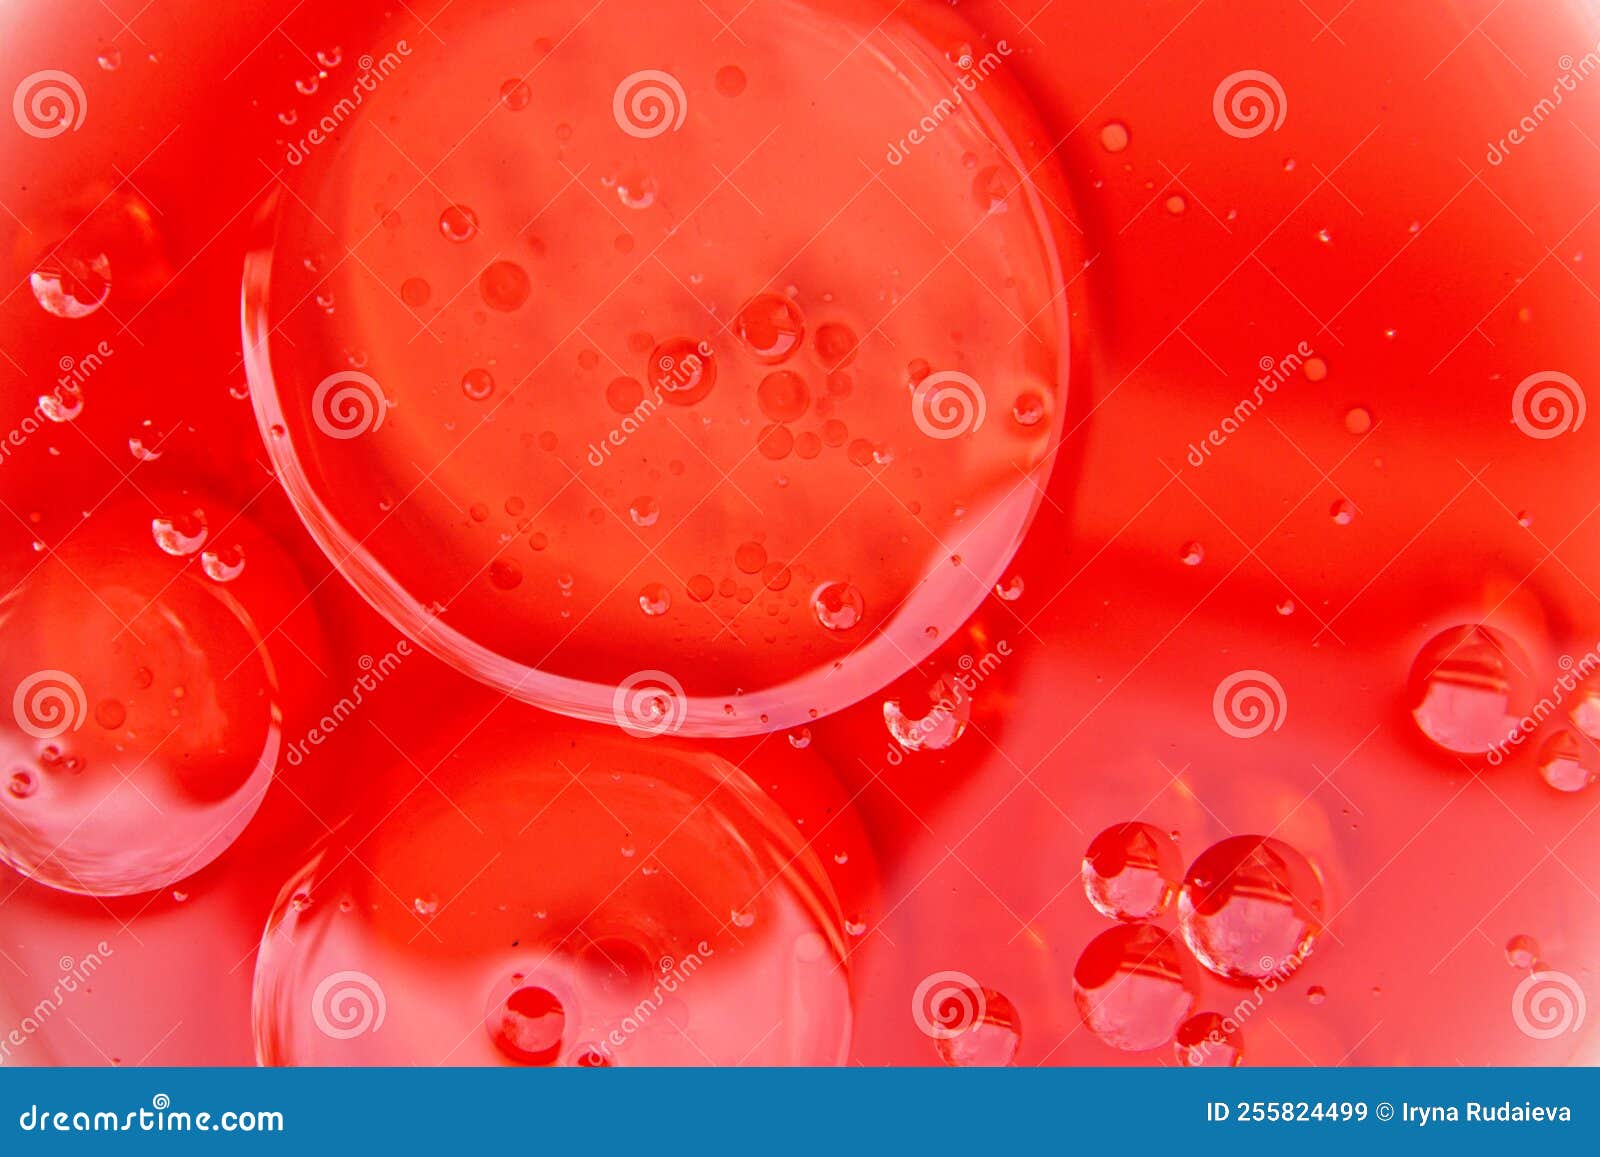 Abstract Bright Light Red Background. Red Blood Cell Stock Image - Image of  transparent, human: 255824499